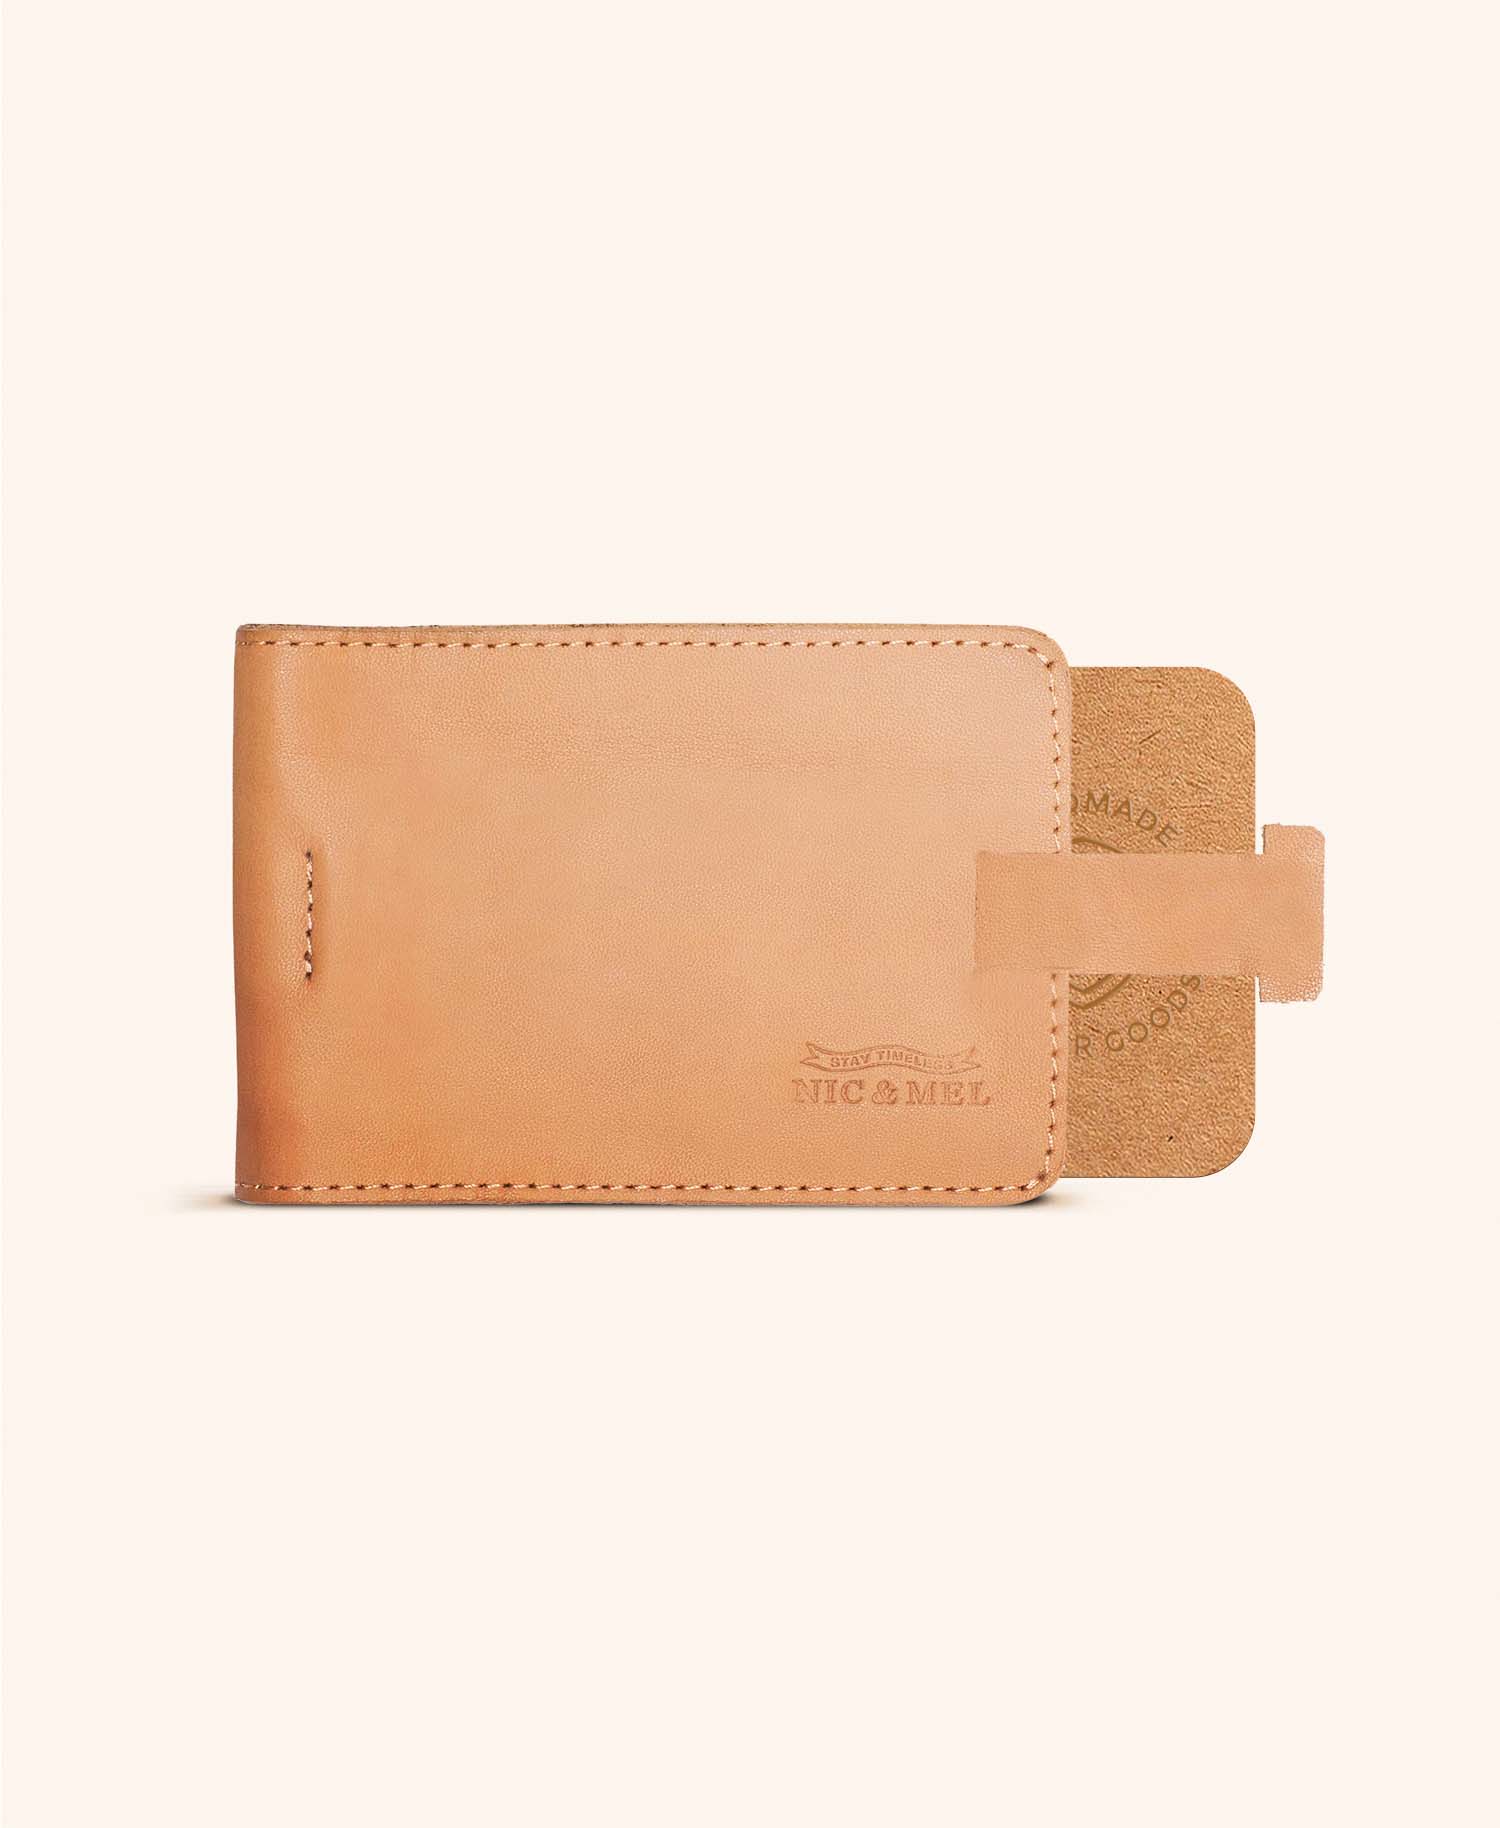 floyd card holder naked tan leather w_ money clip open